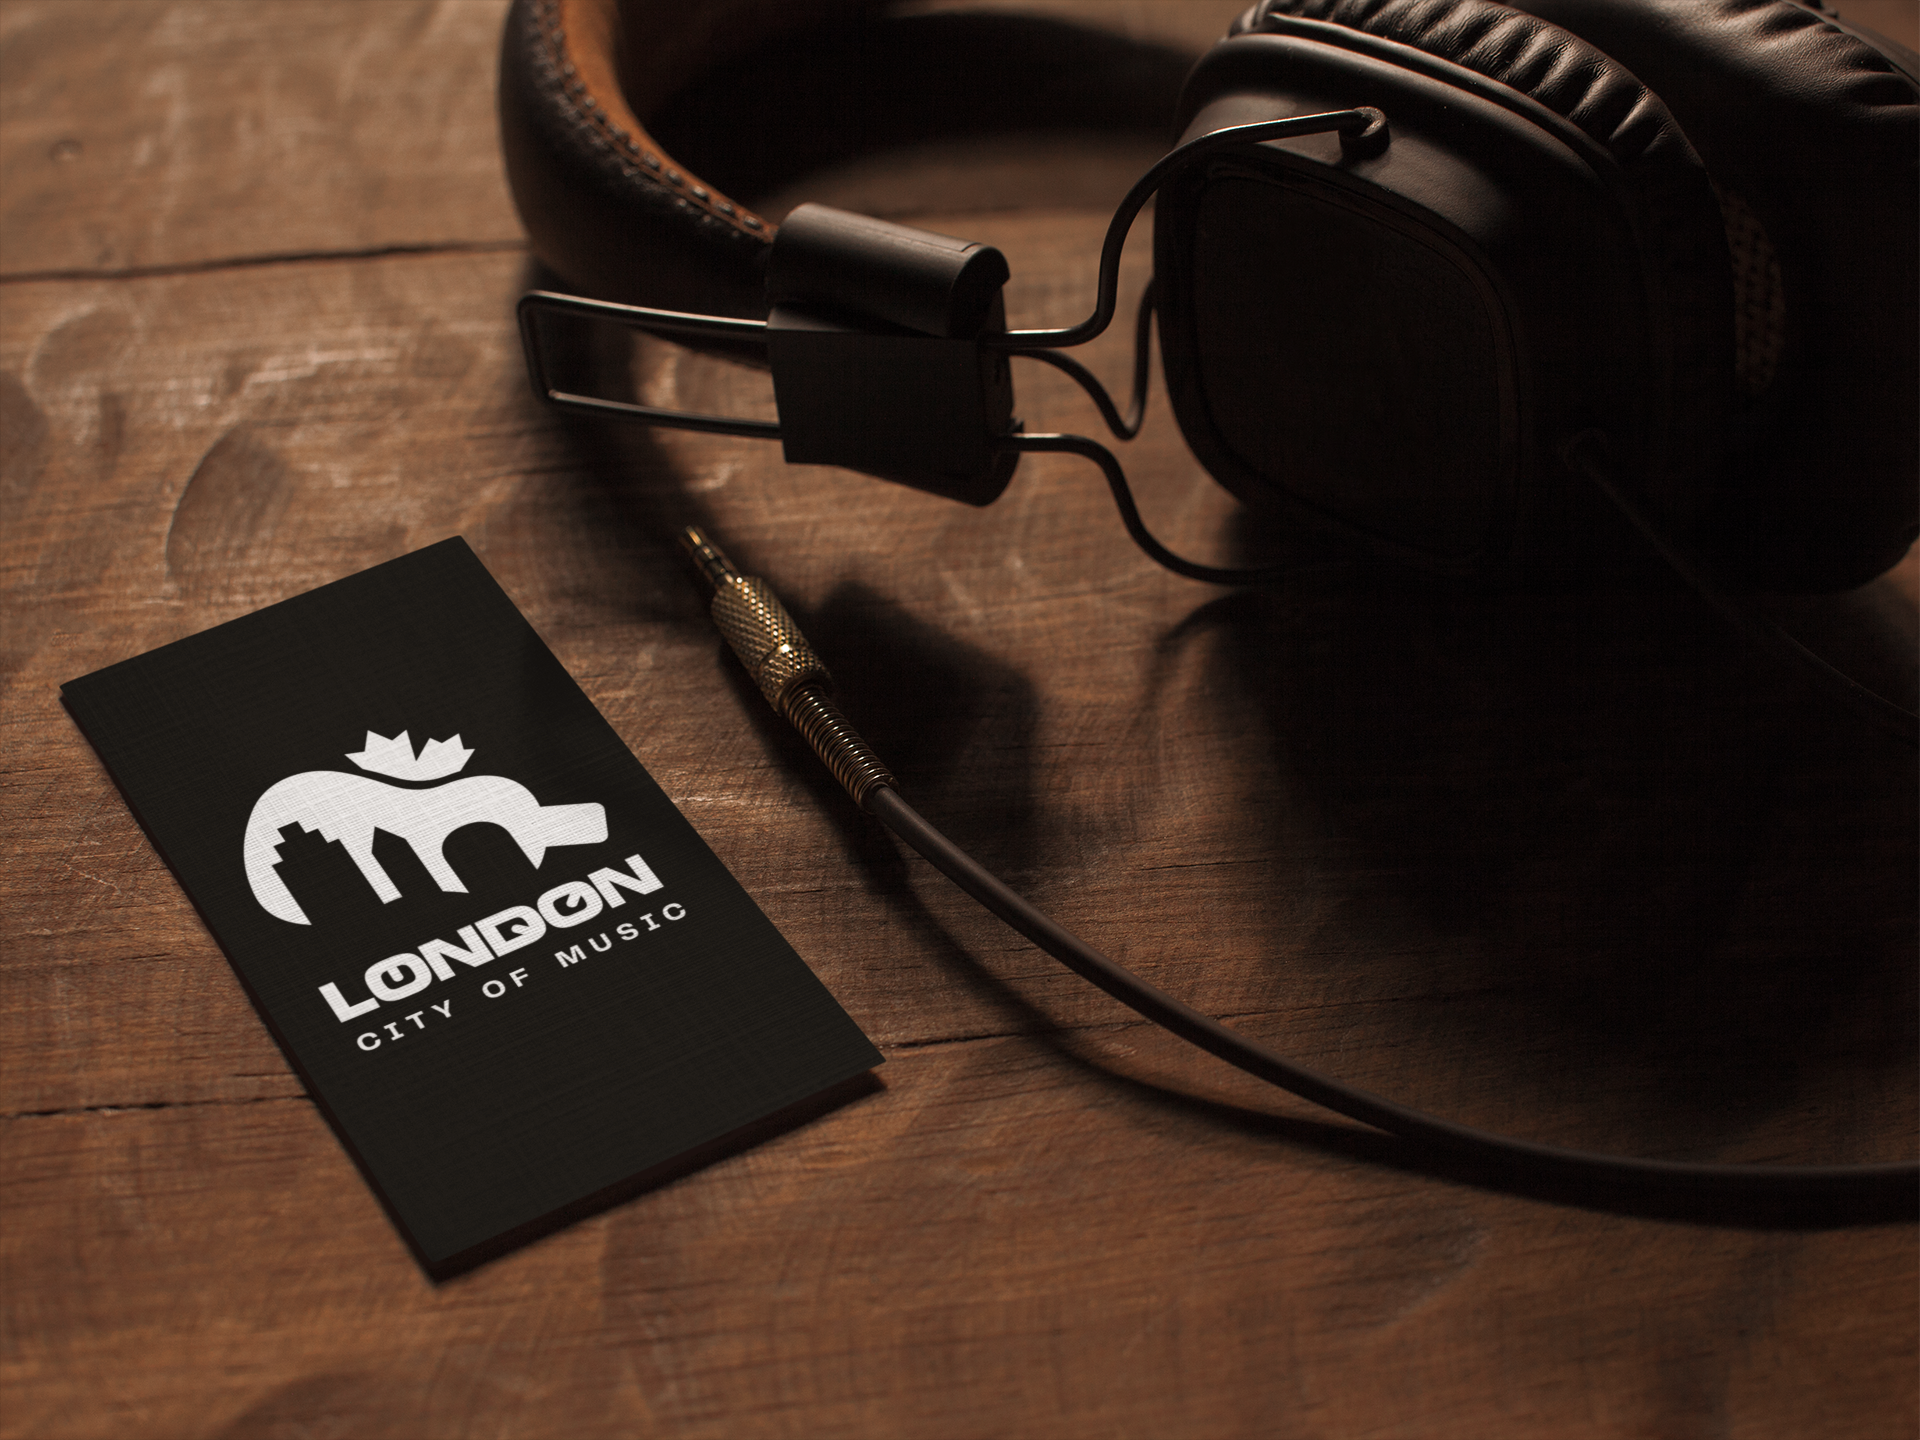 vertical-business-card-template-lying-on-a-wooden-table-next-to-headphones-a14994.png